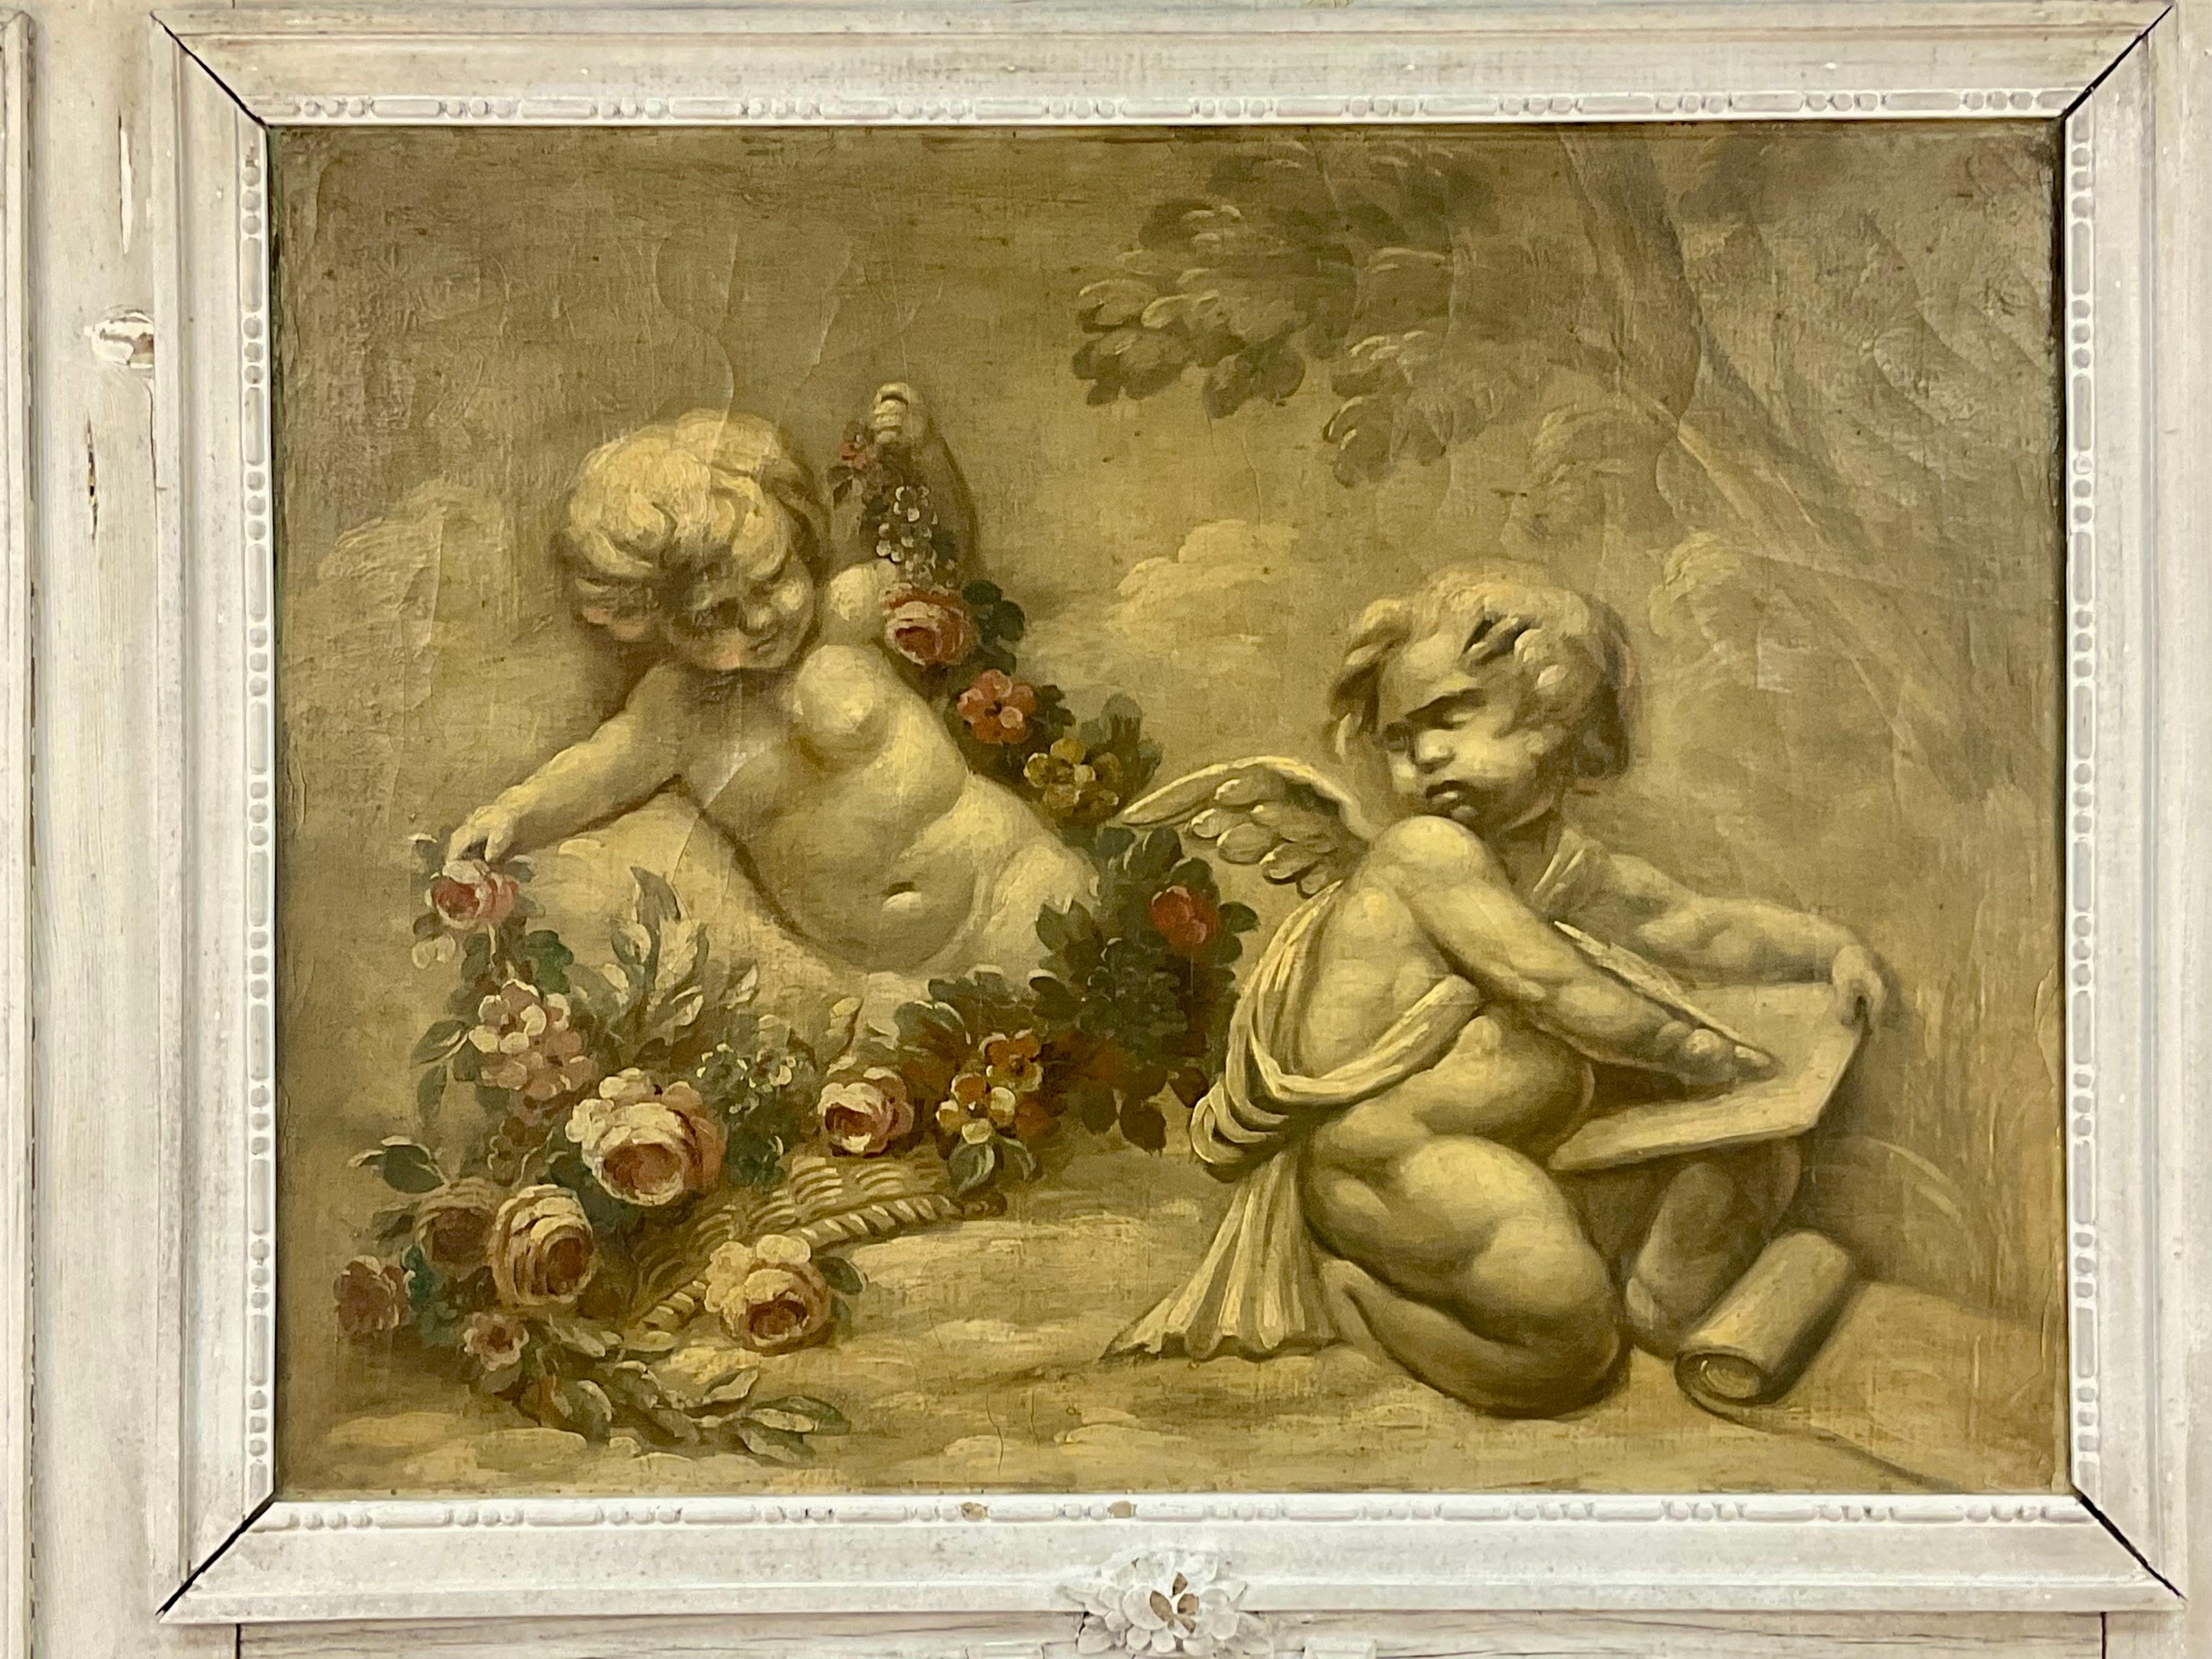 Charming Trumeau mirror with a painting of two cherubs sitting among pink flowers with green leaves. Mirror below is set into a tall wooden frame with carved sculptural decorations and painted in white. 